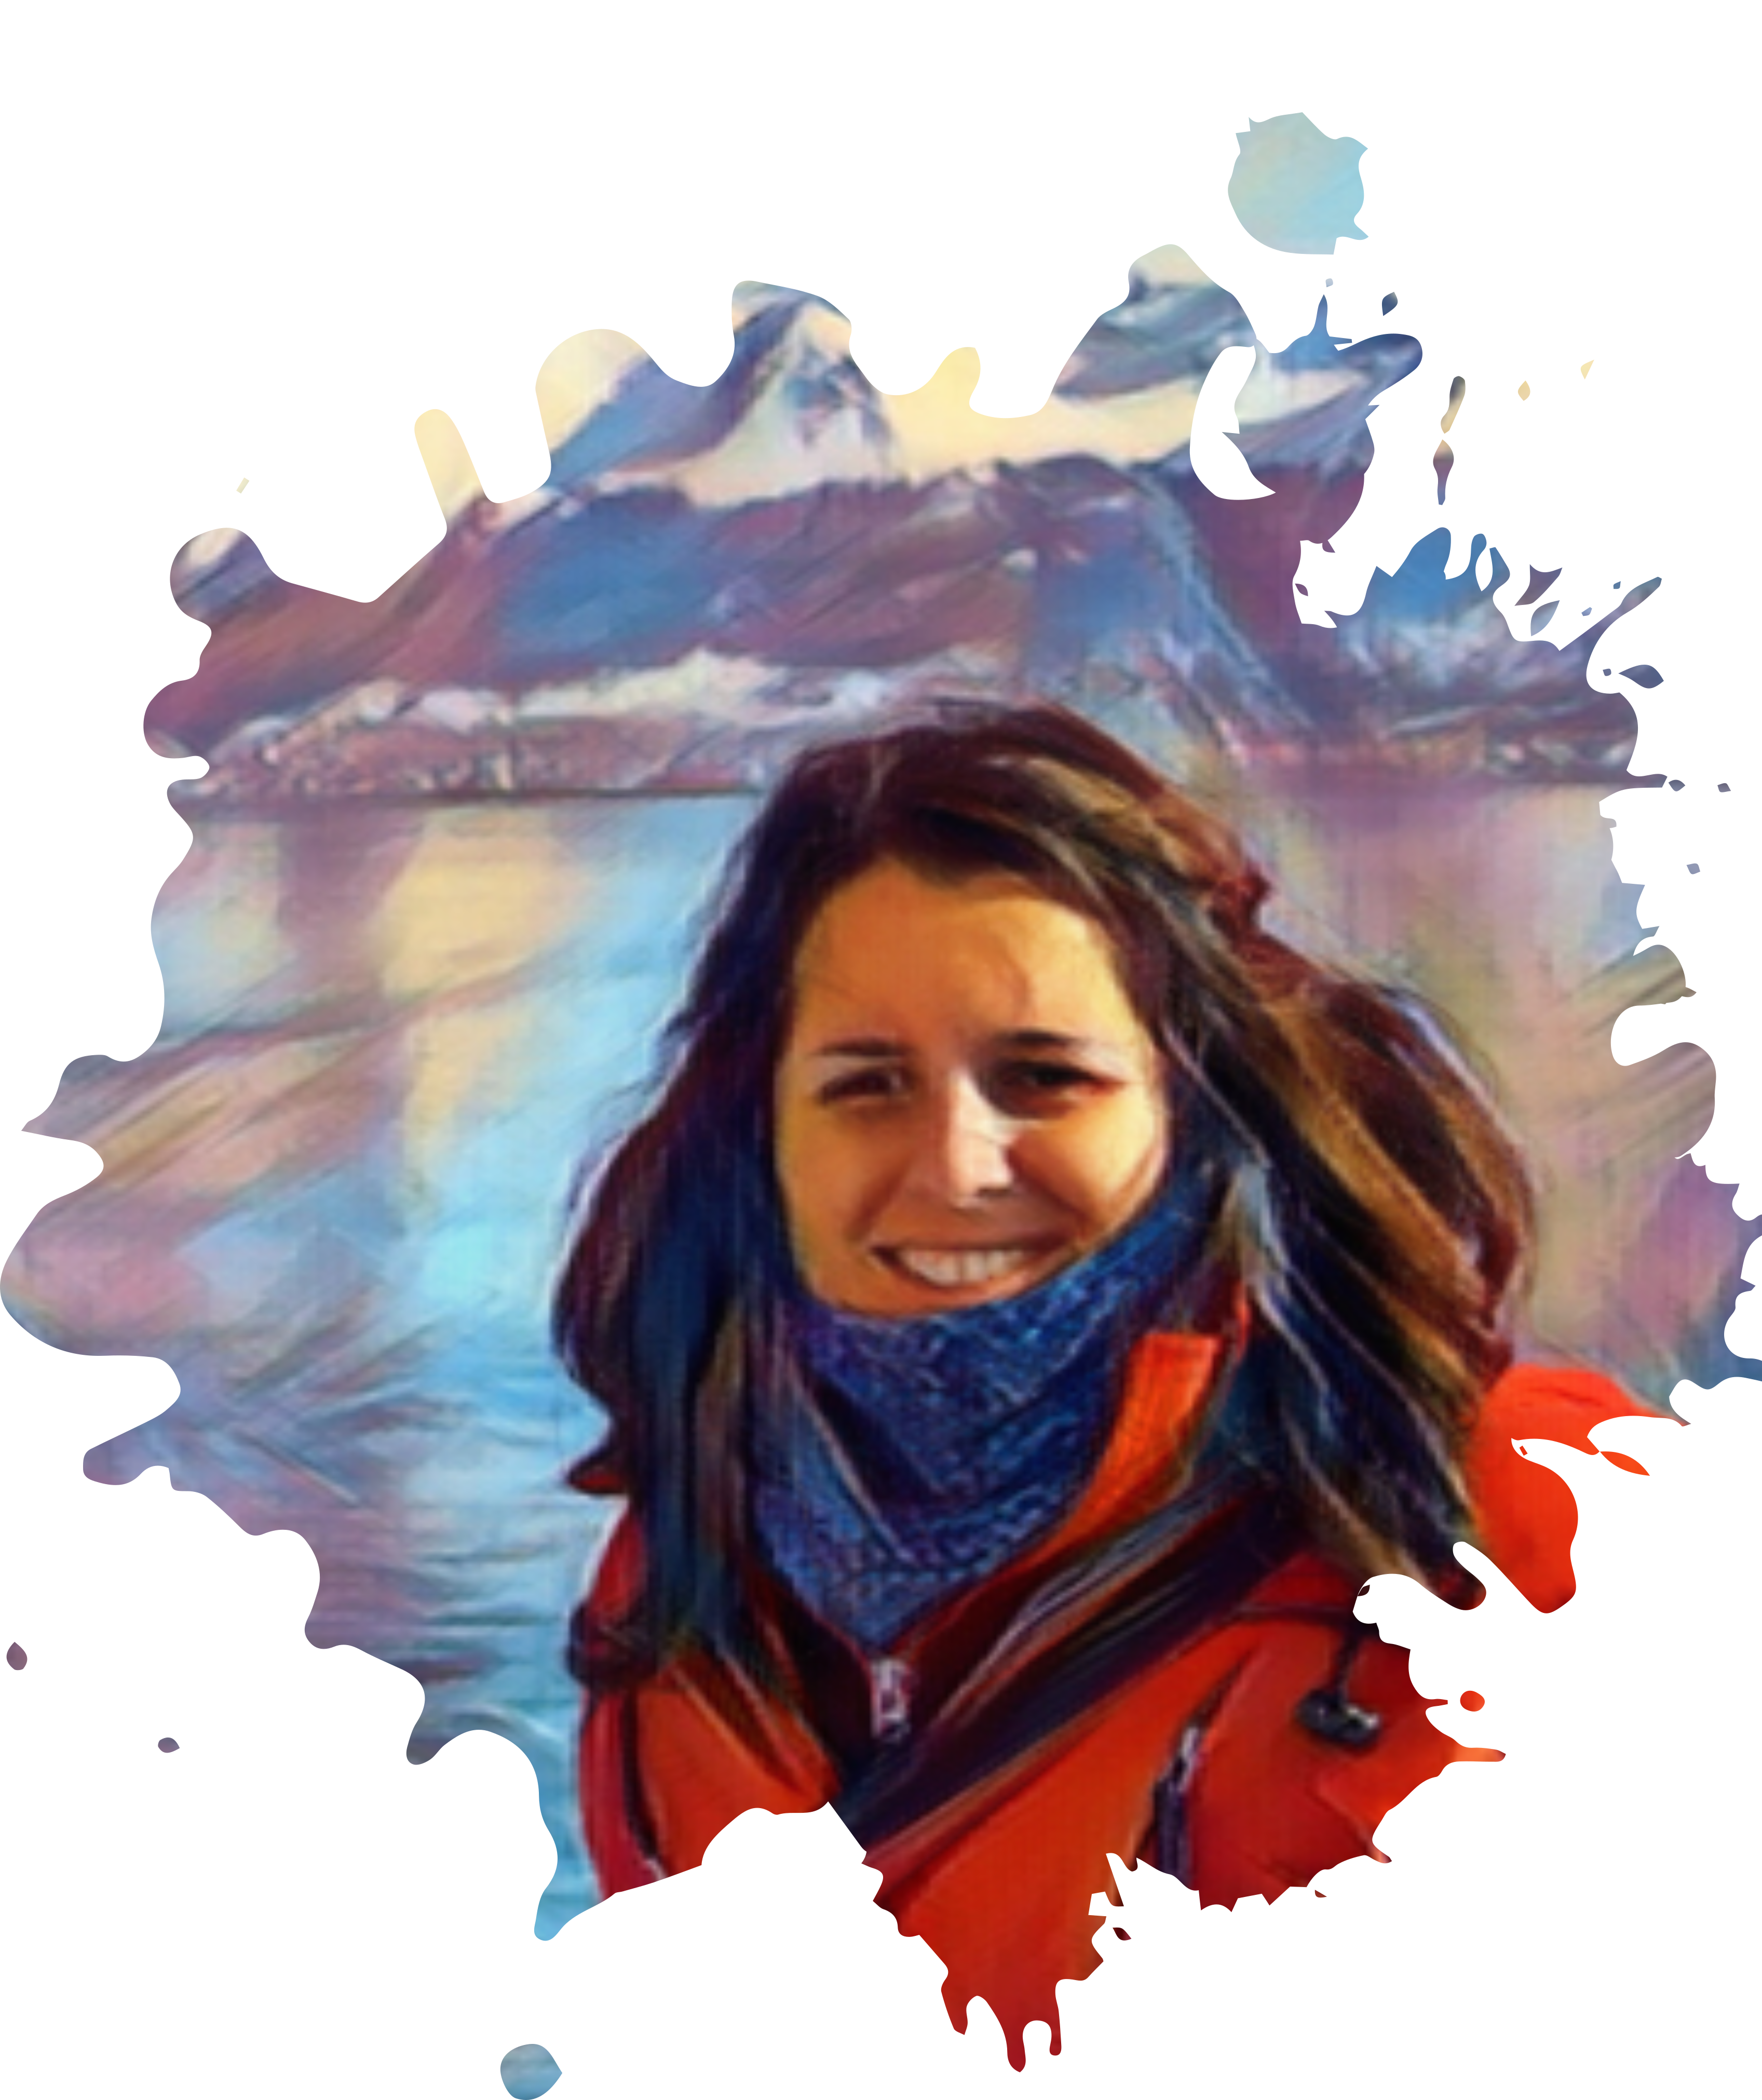 Picture of Virginia García Alonso showing the torso and face. Virginia is wearing a red jacket, purple scarf and her hair loose. In the background there is the sea and mountains with snow. The photo was edited to look like a painting in the website www.goart.foto employing a filter called Rich Colored which accentuates the colors and gives the sense of being a painted portrait.